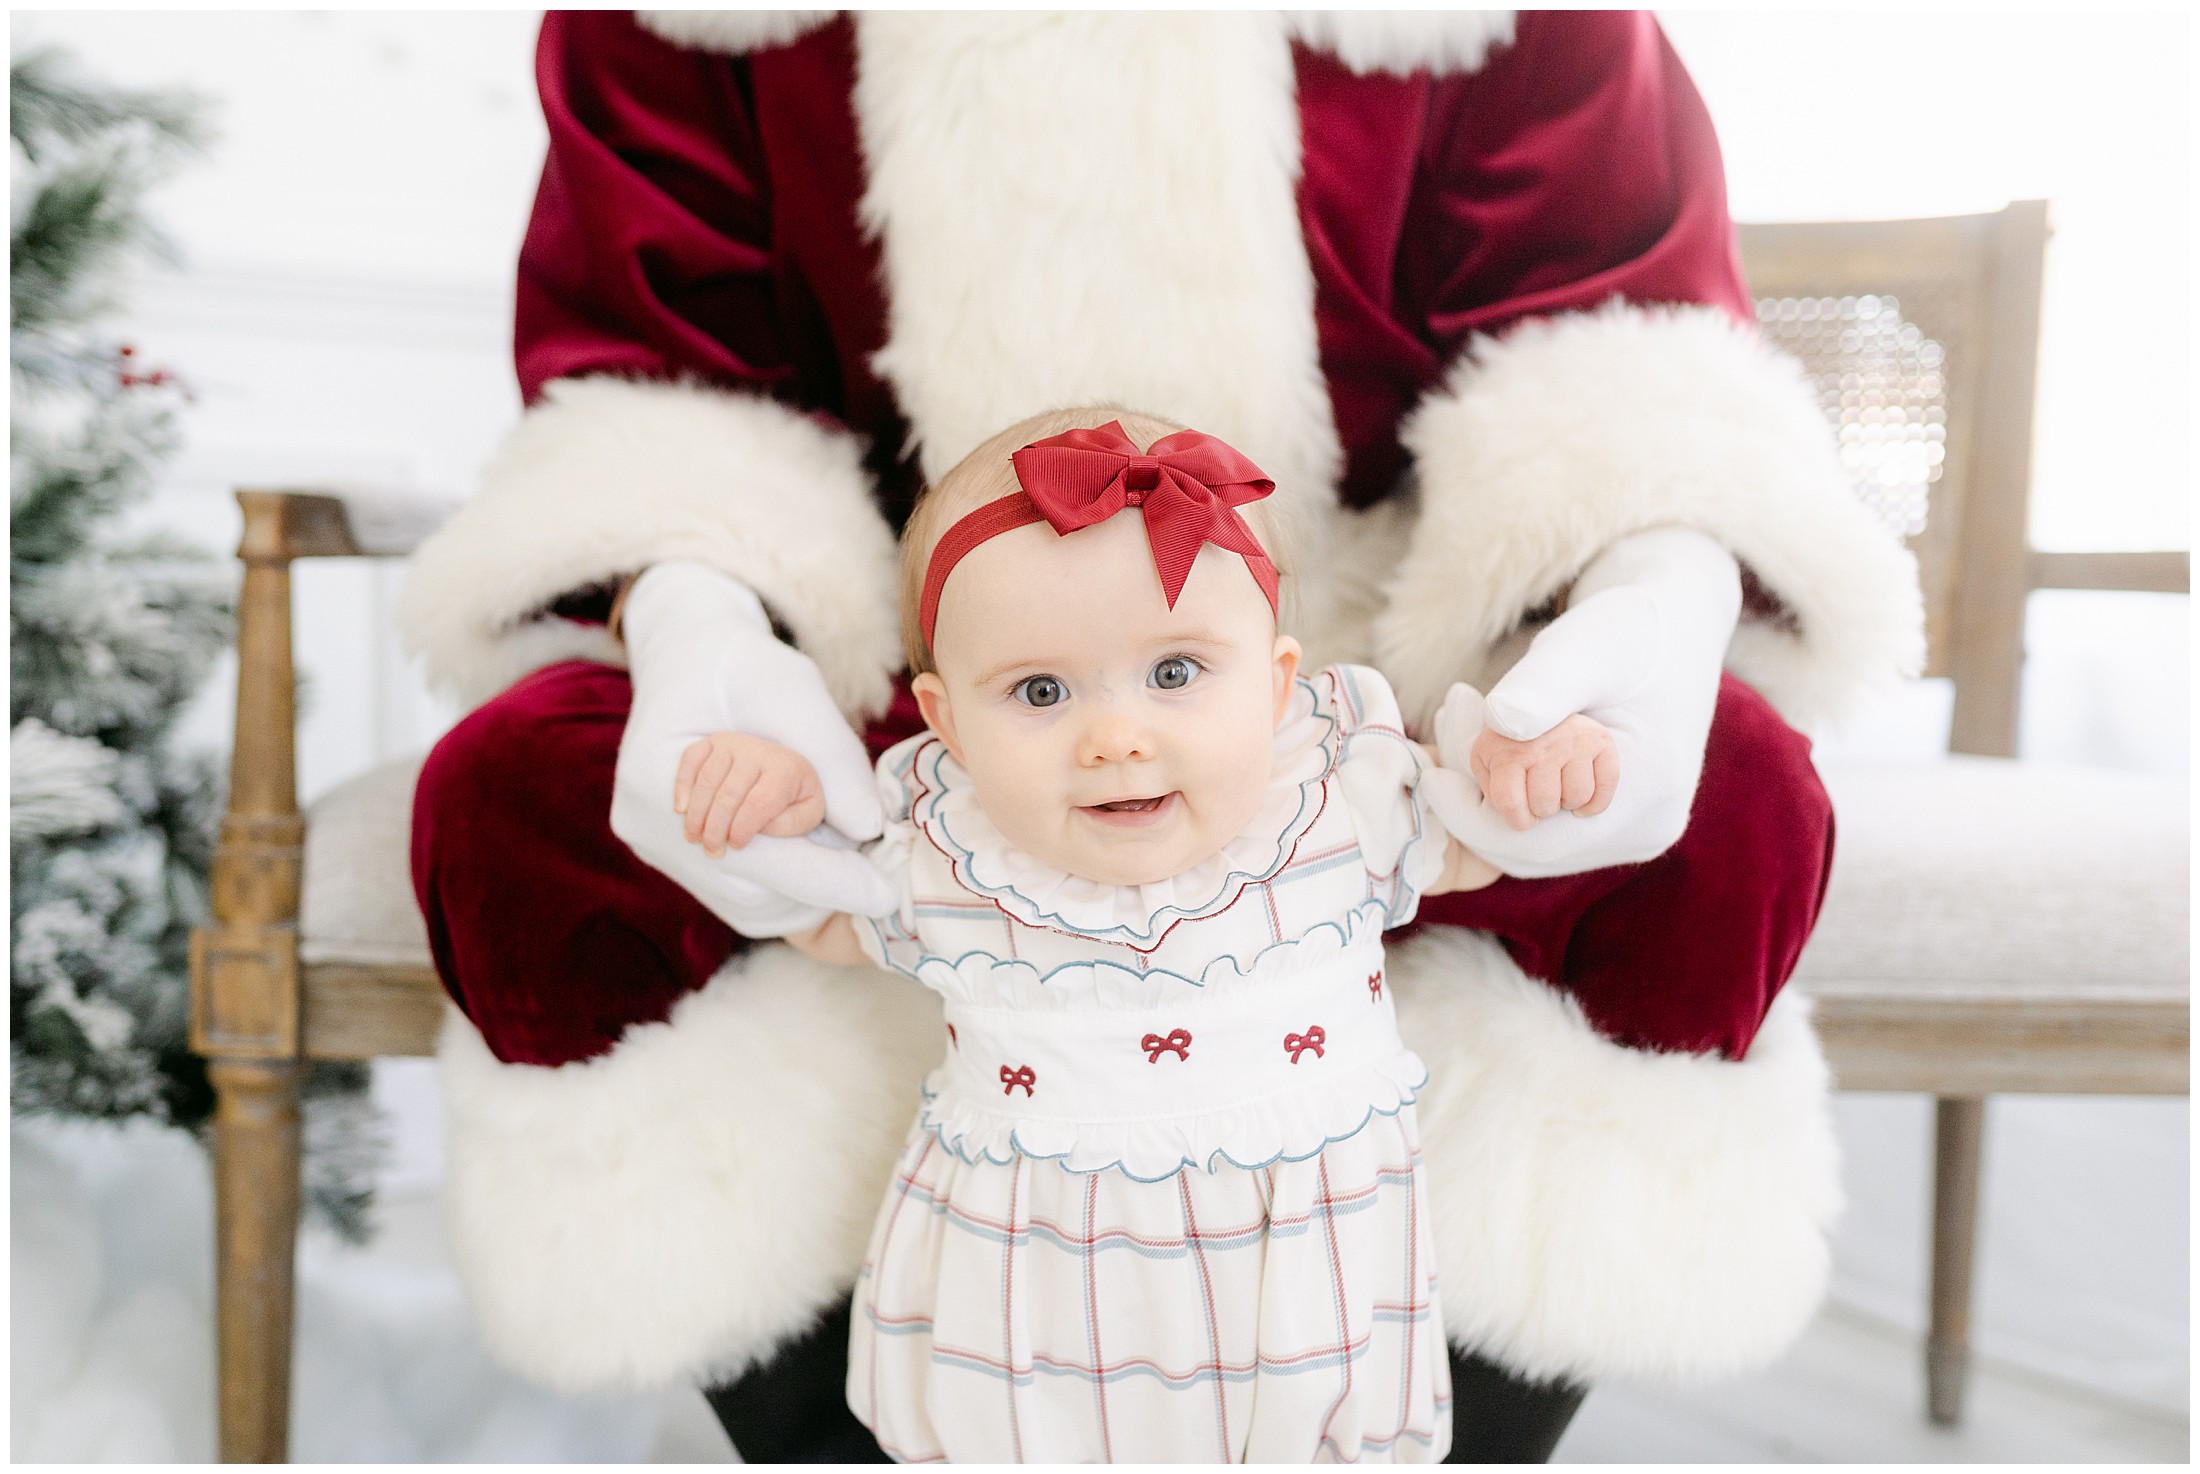 Baby standing while Santa holds her hands to help her stand.